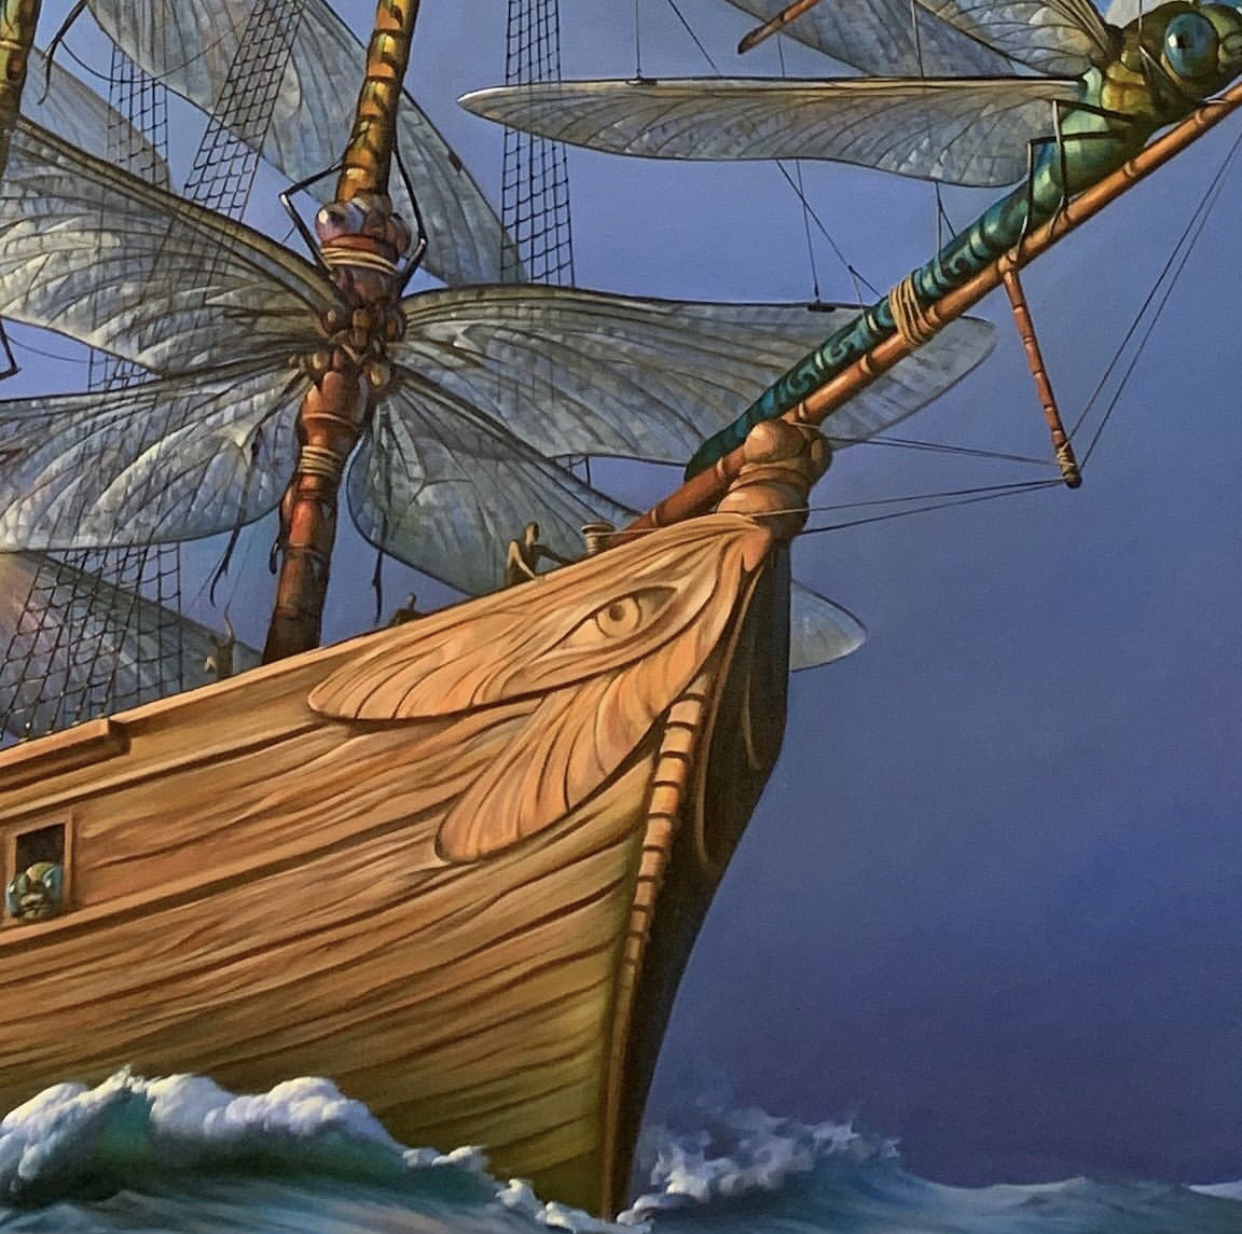 What kind of ships did the Kushites use? How was seafaring like in